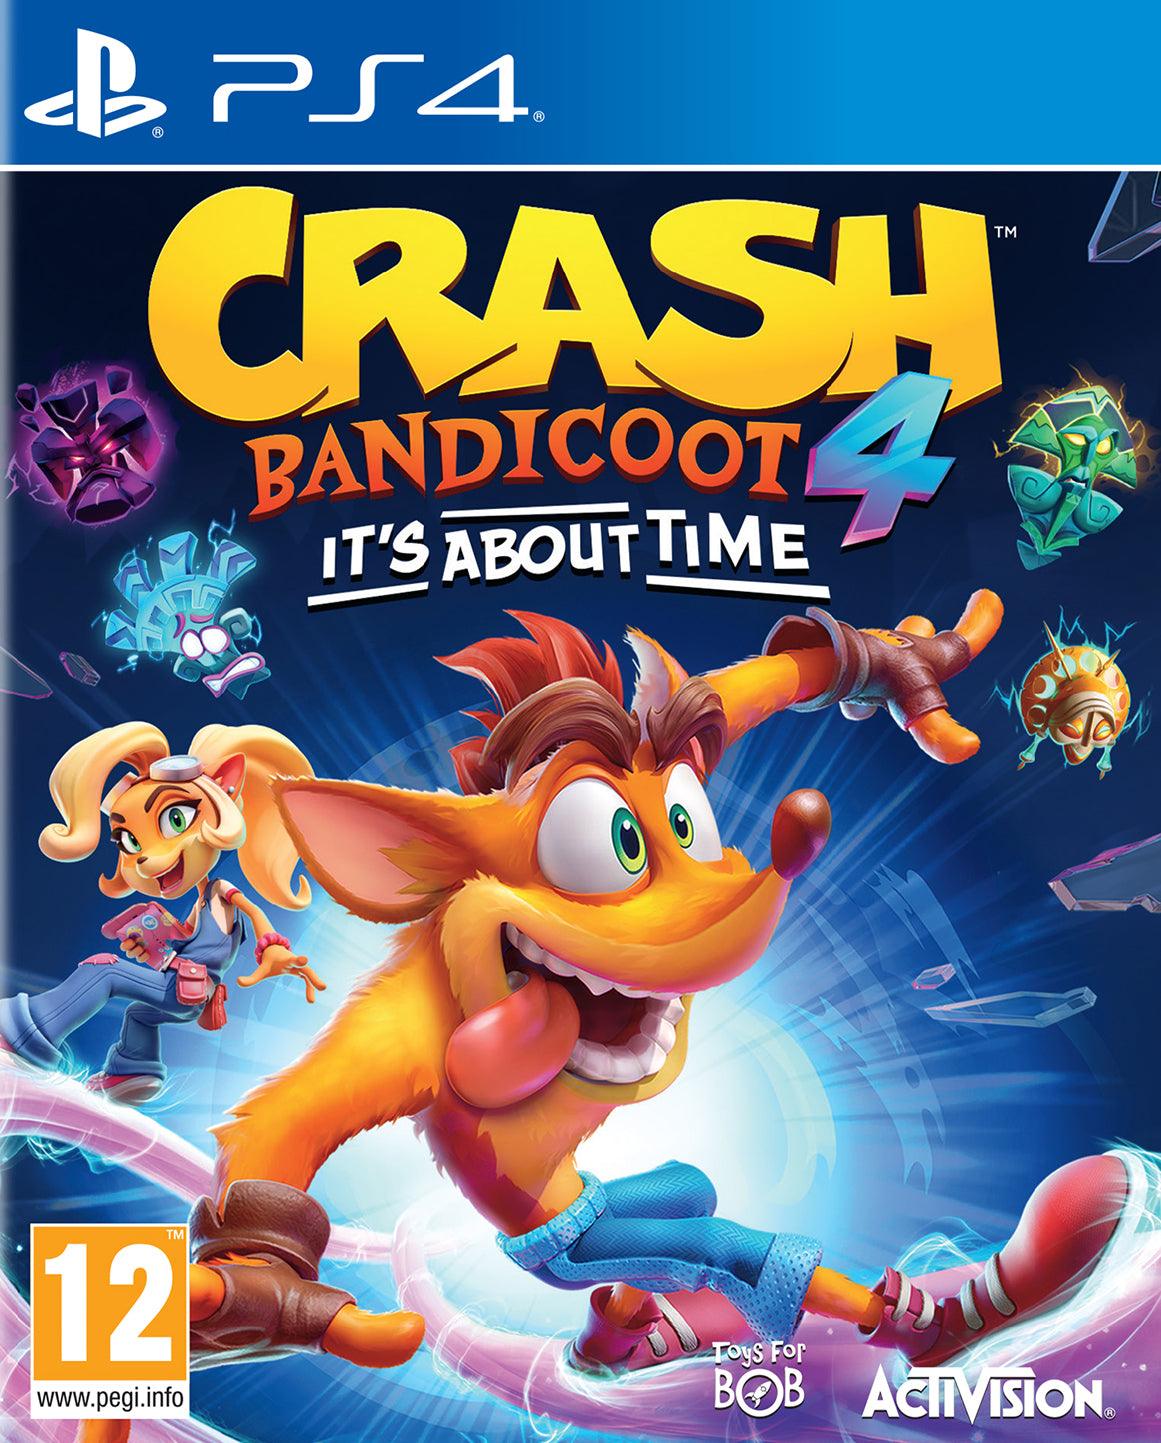 Crash Bandicoot Its About Time - Want a New Gadget